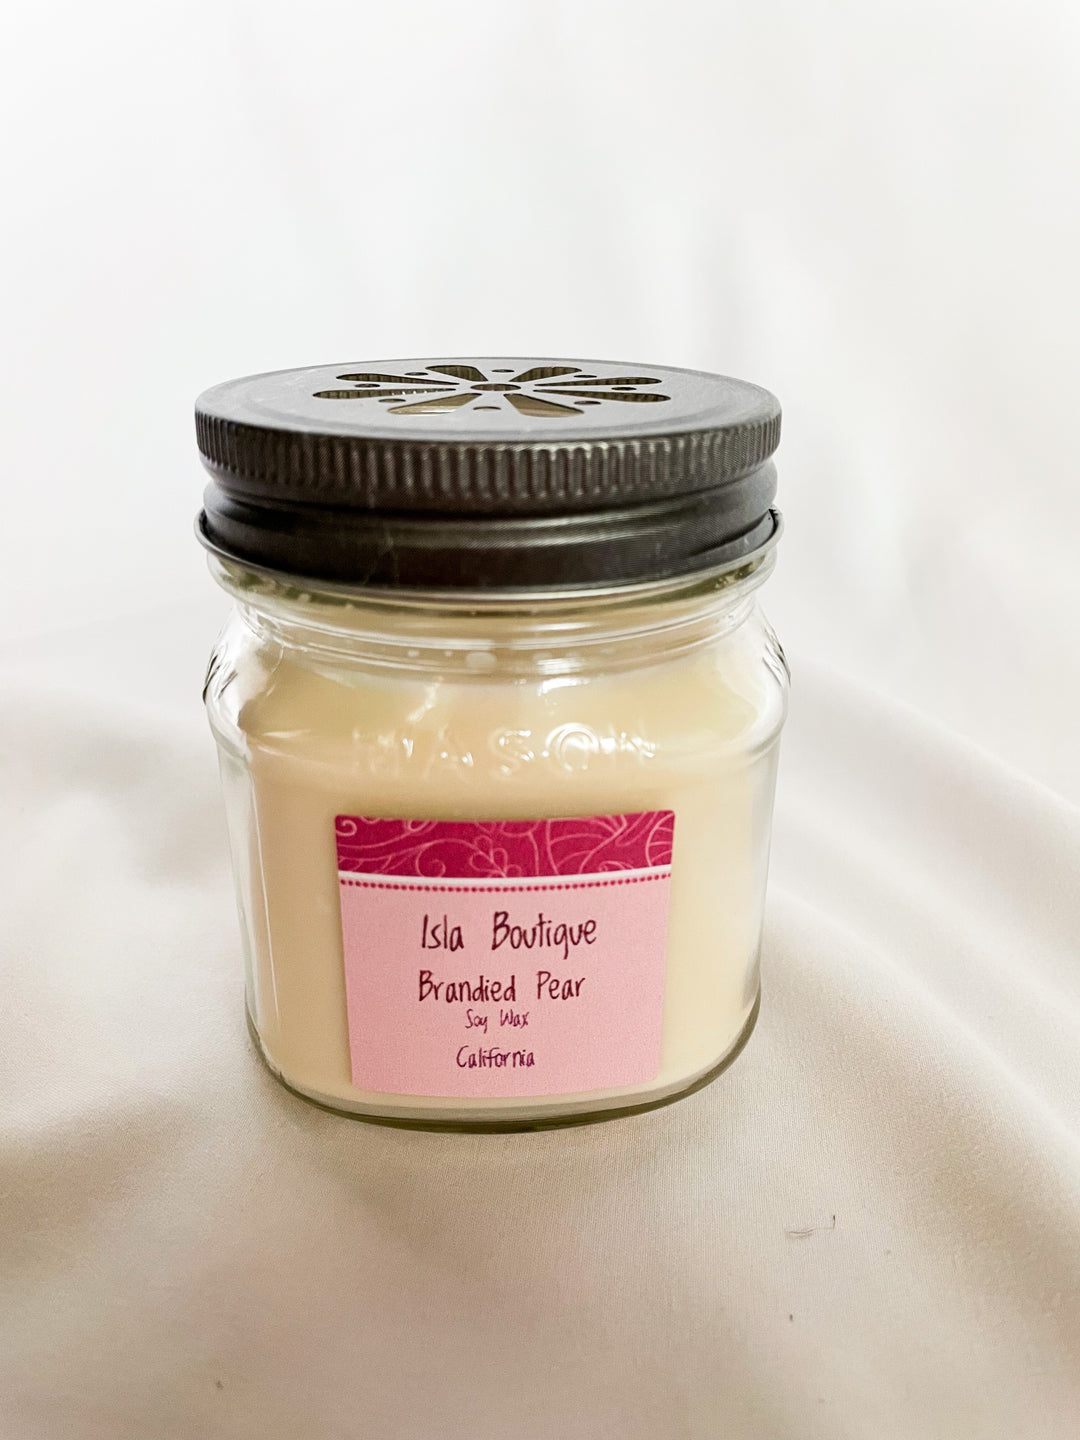 California made Brandied Pear Soy Wax Candle 8oz